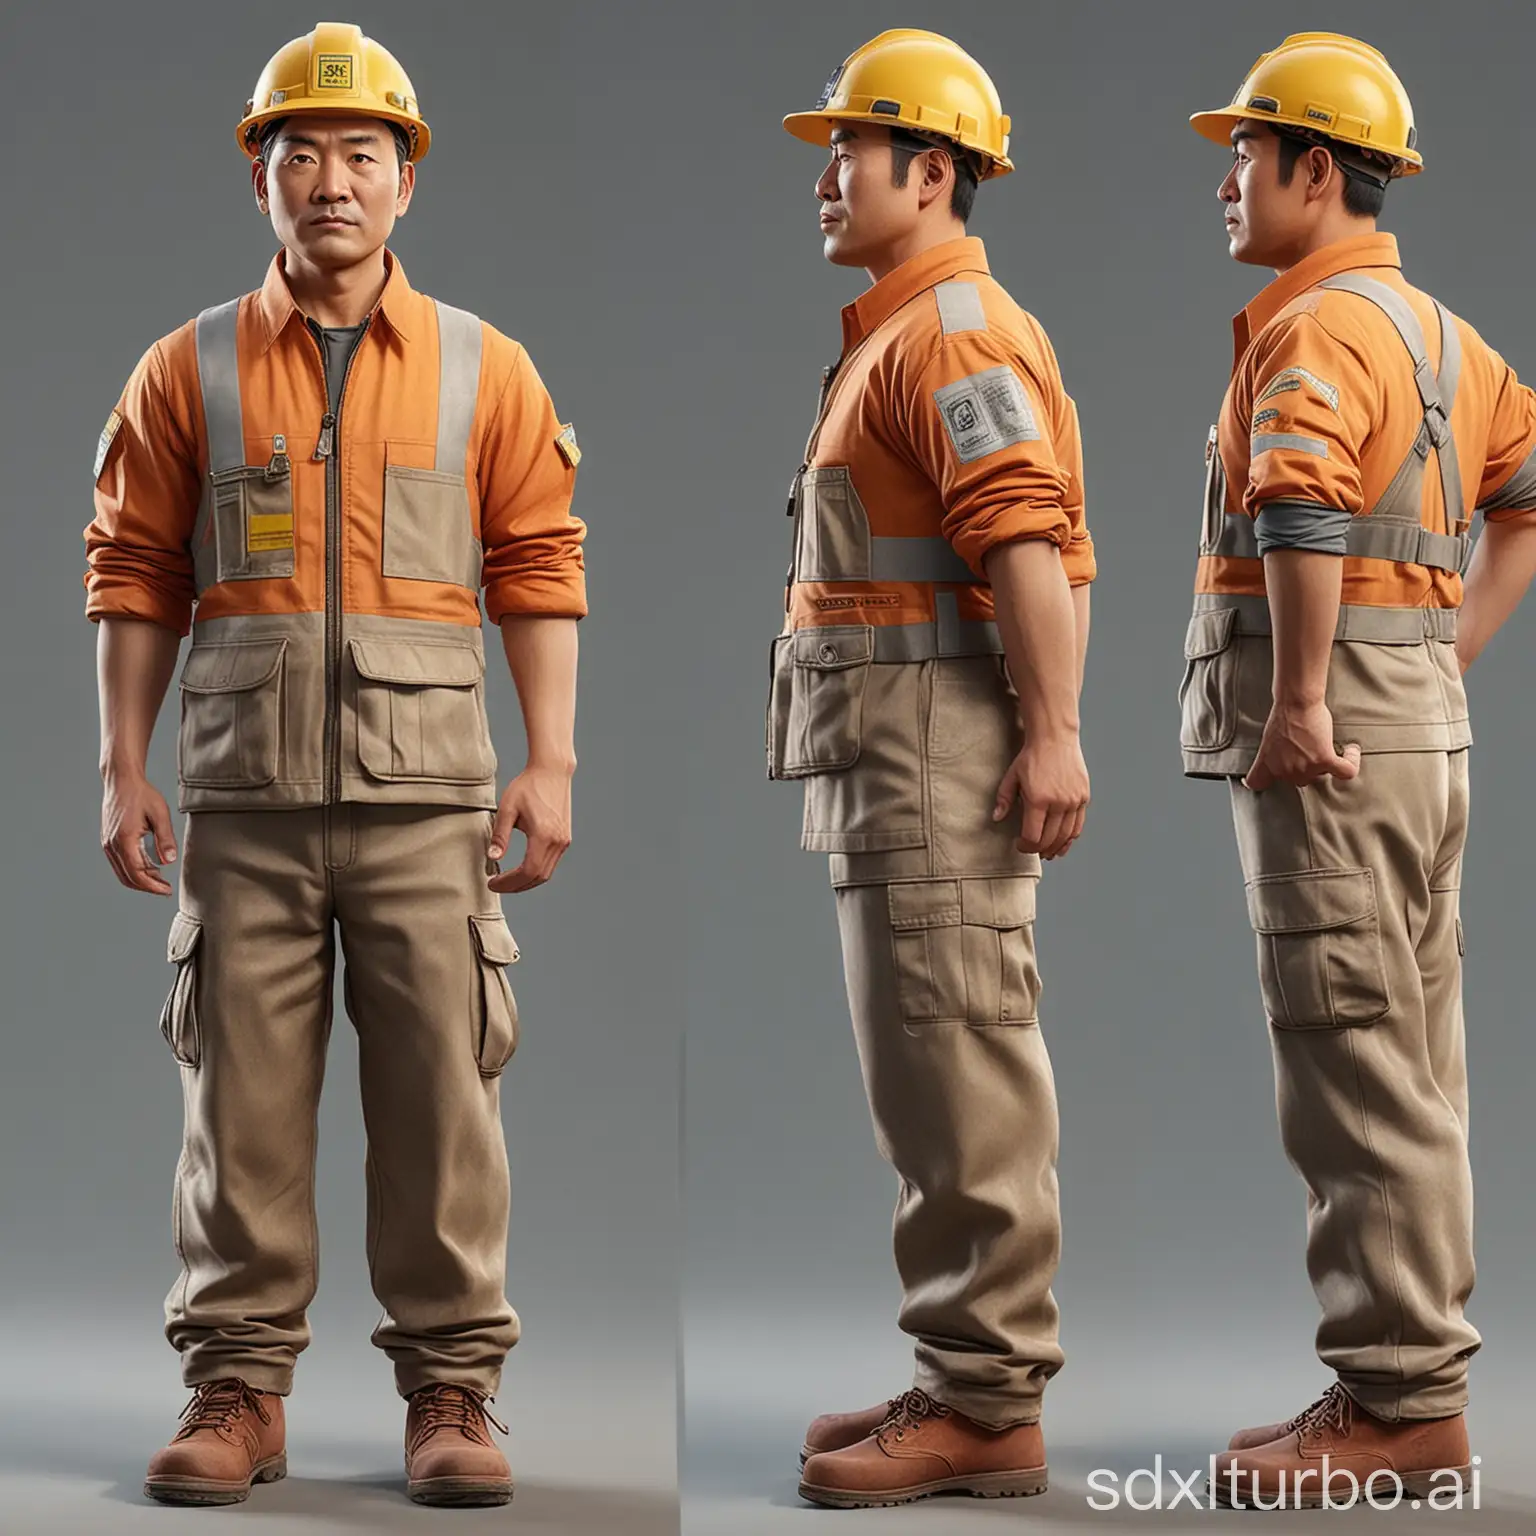 Chinese-Third-Line-Construction-Worker-Authentic-Representation-of-1970s-Era